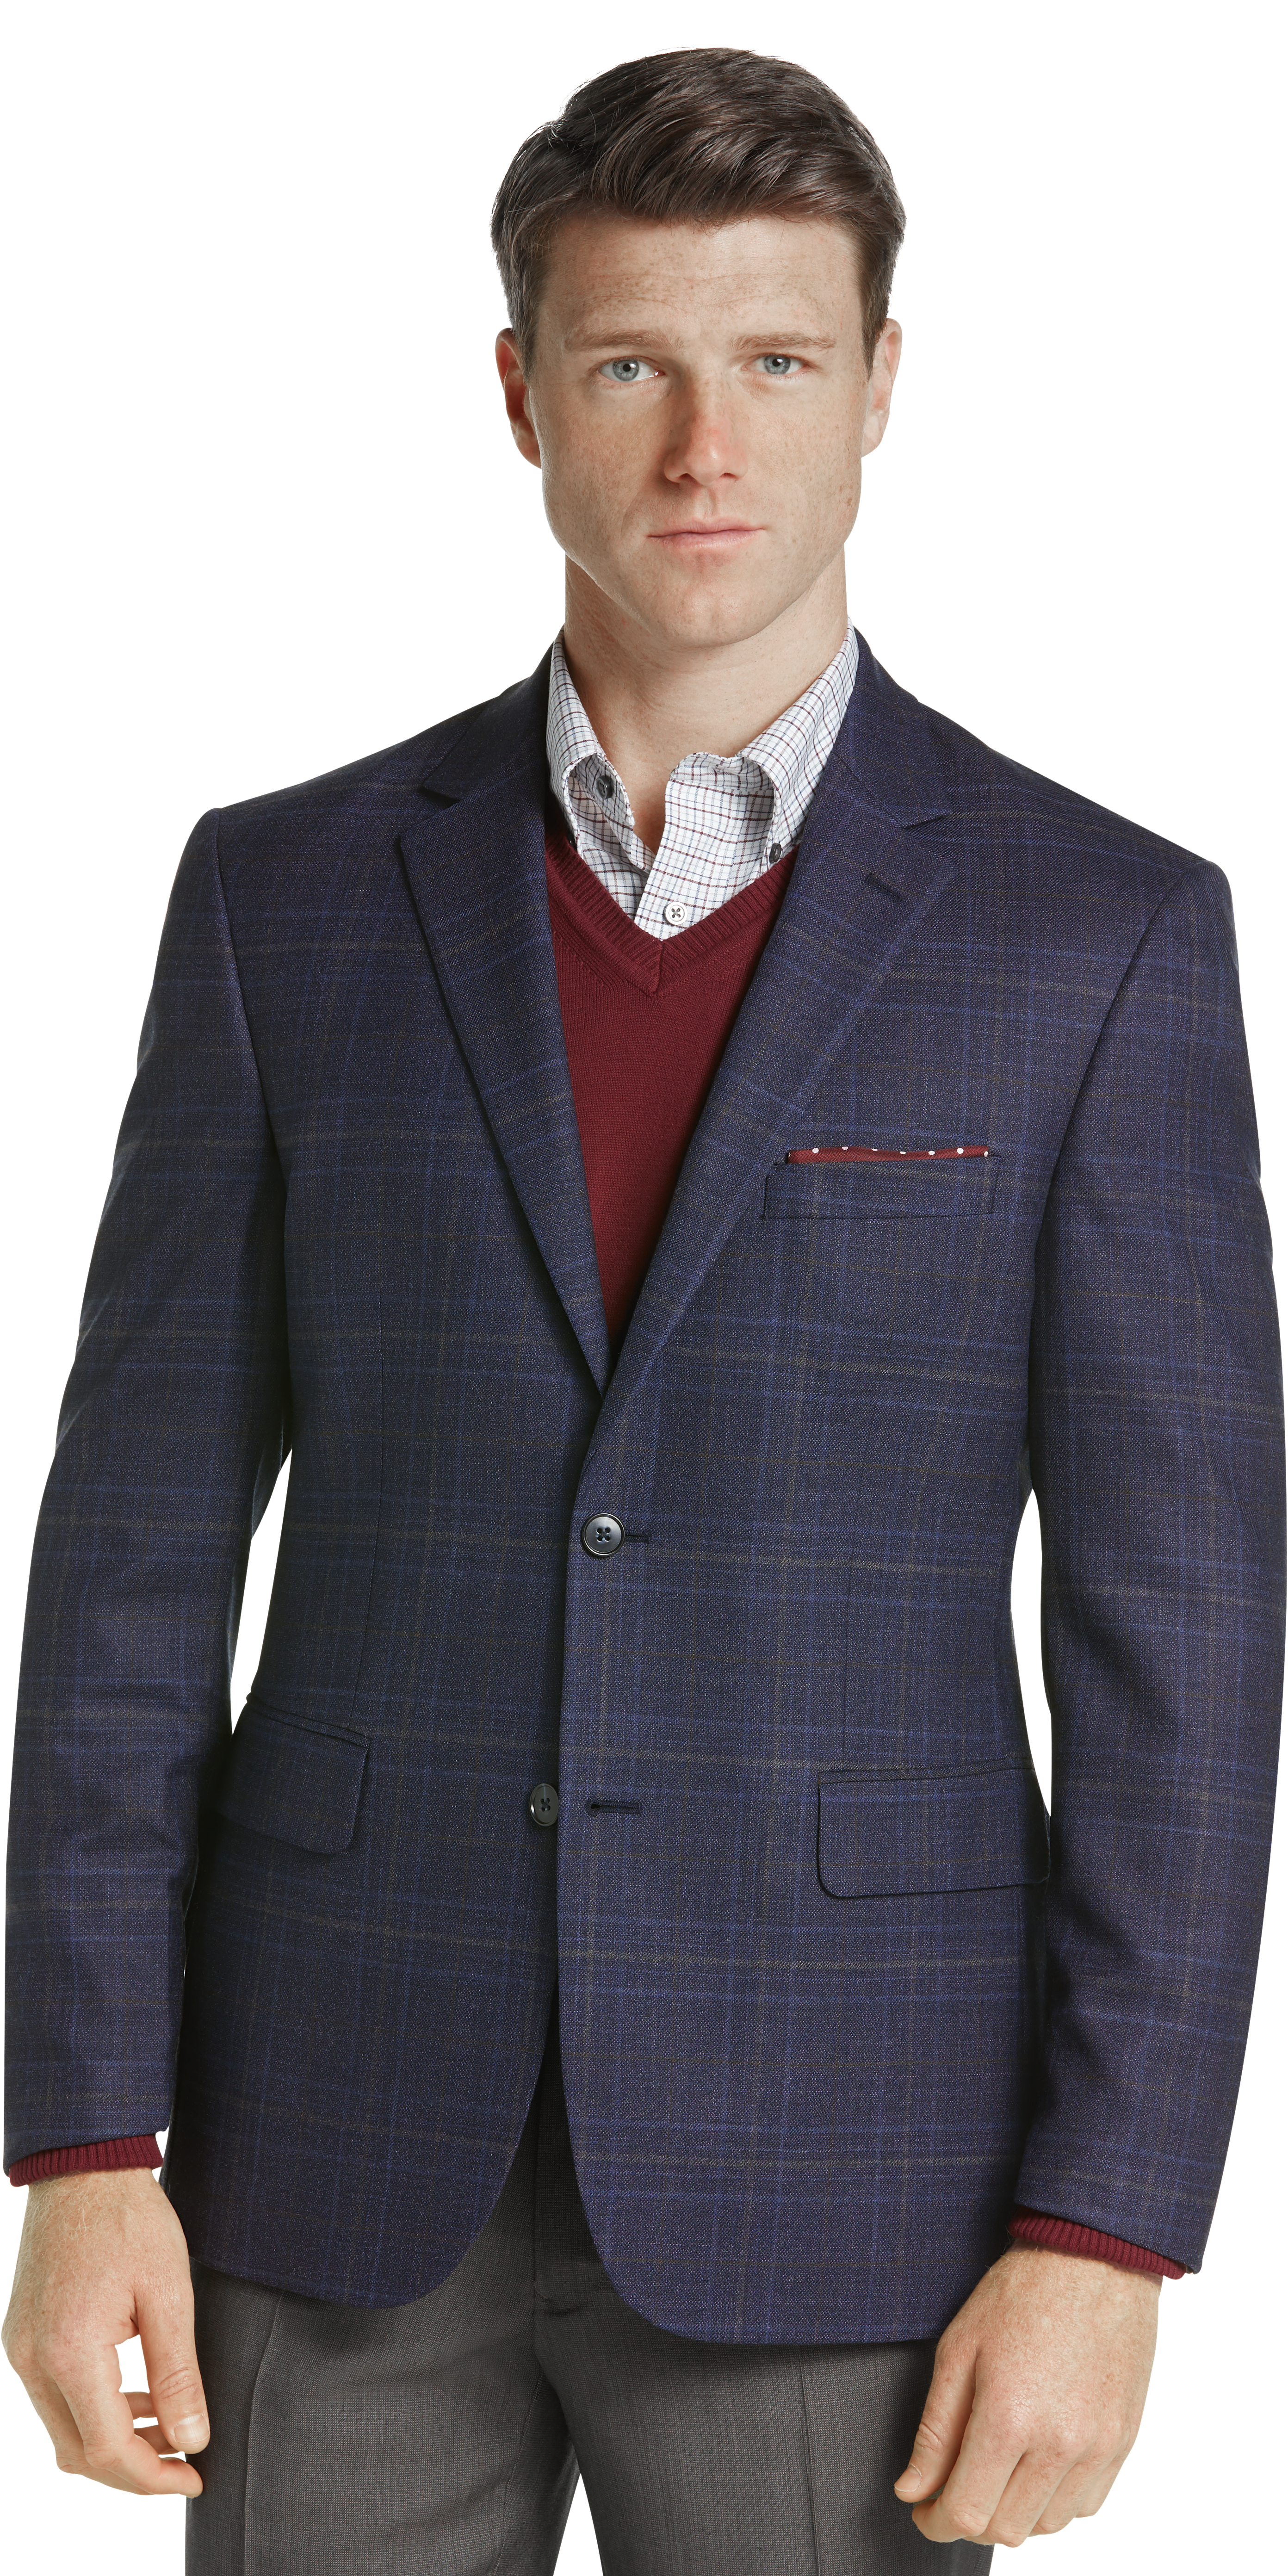 Traveler Collection Tailored Fit Windowpane Sportcoat - Traveler ...